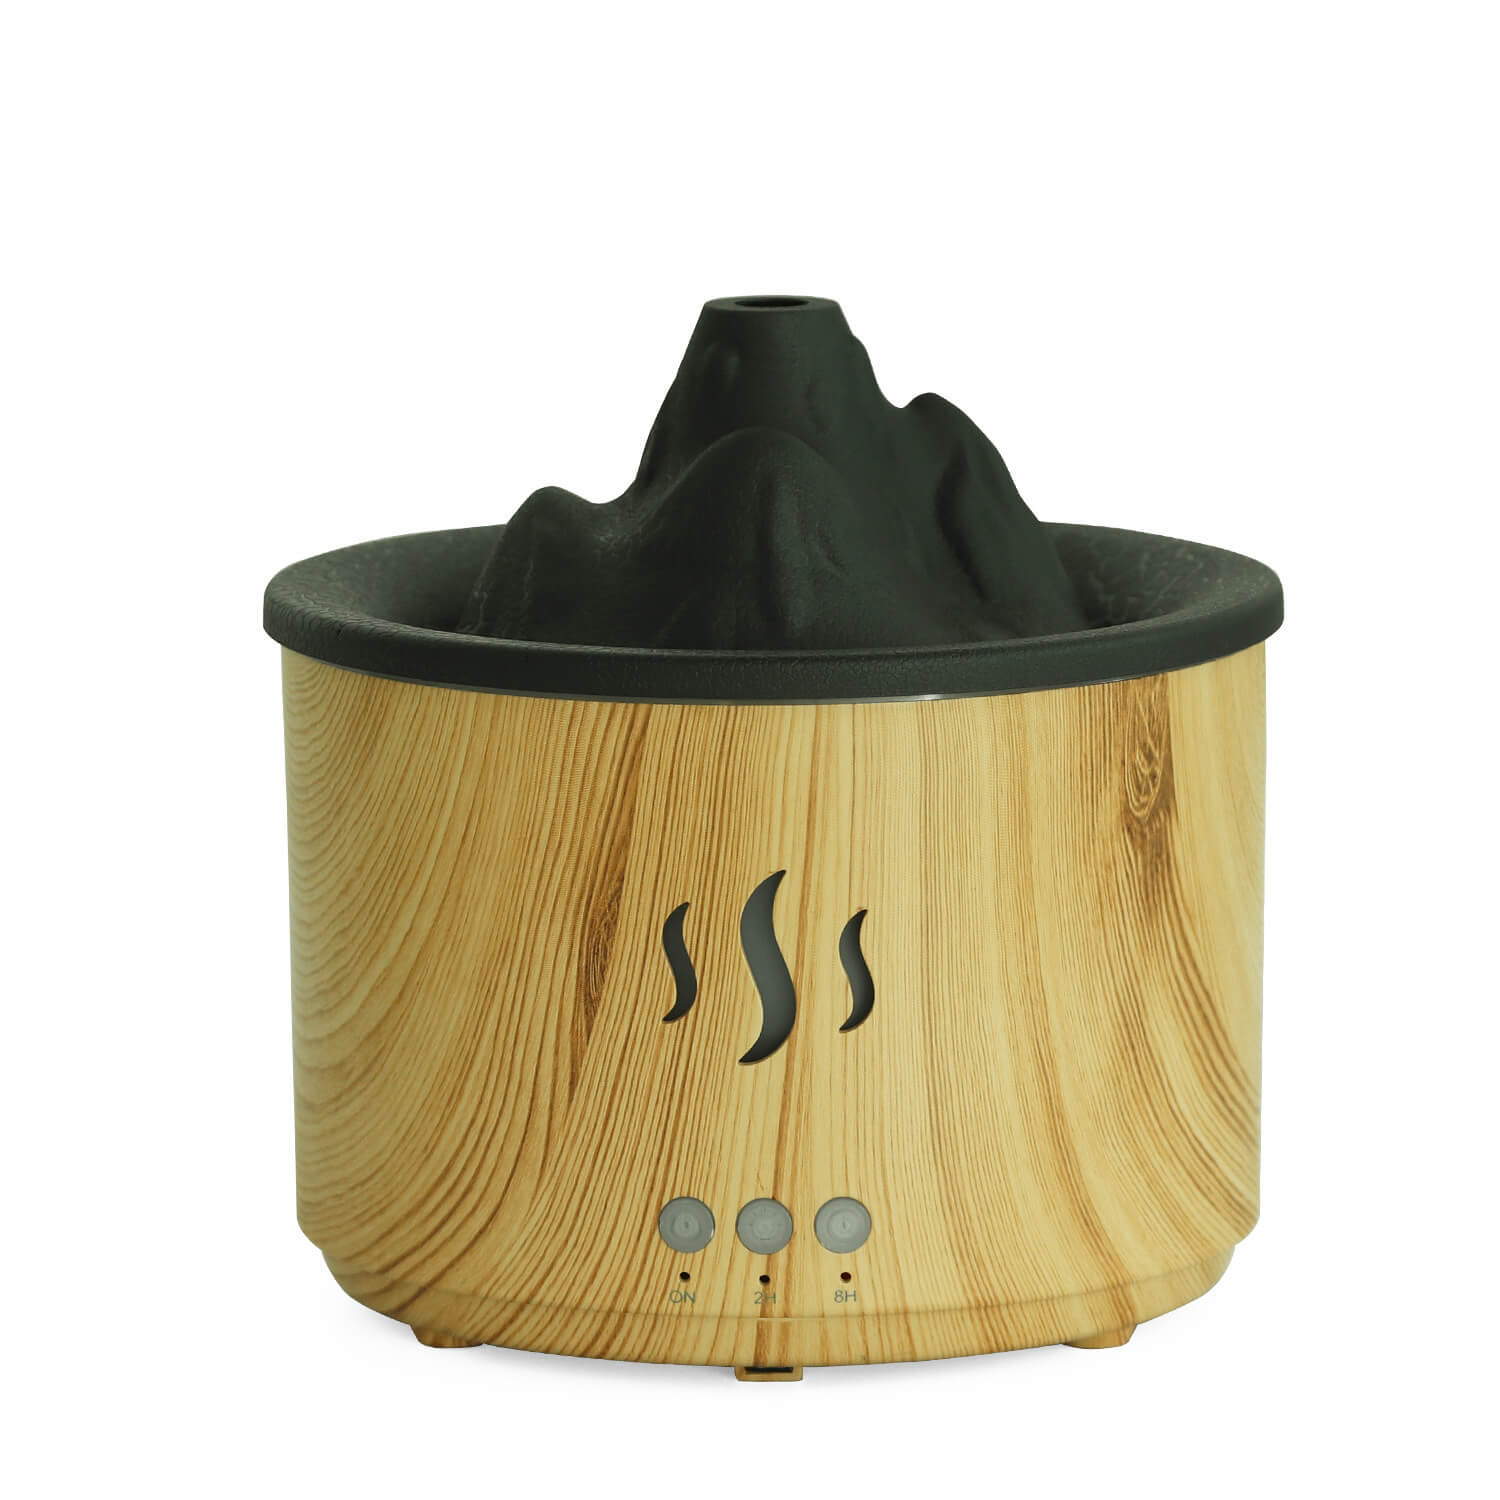 Experience the natural charm with our Volcano Aroma Humidifier in light wood color.